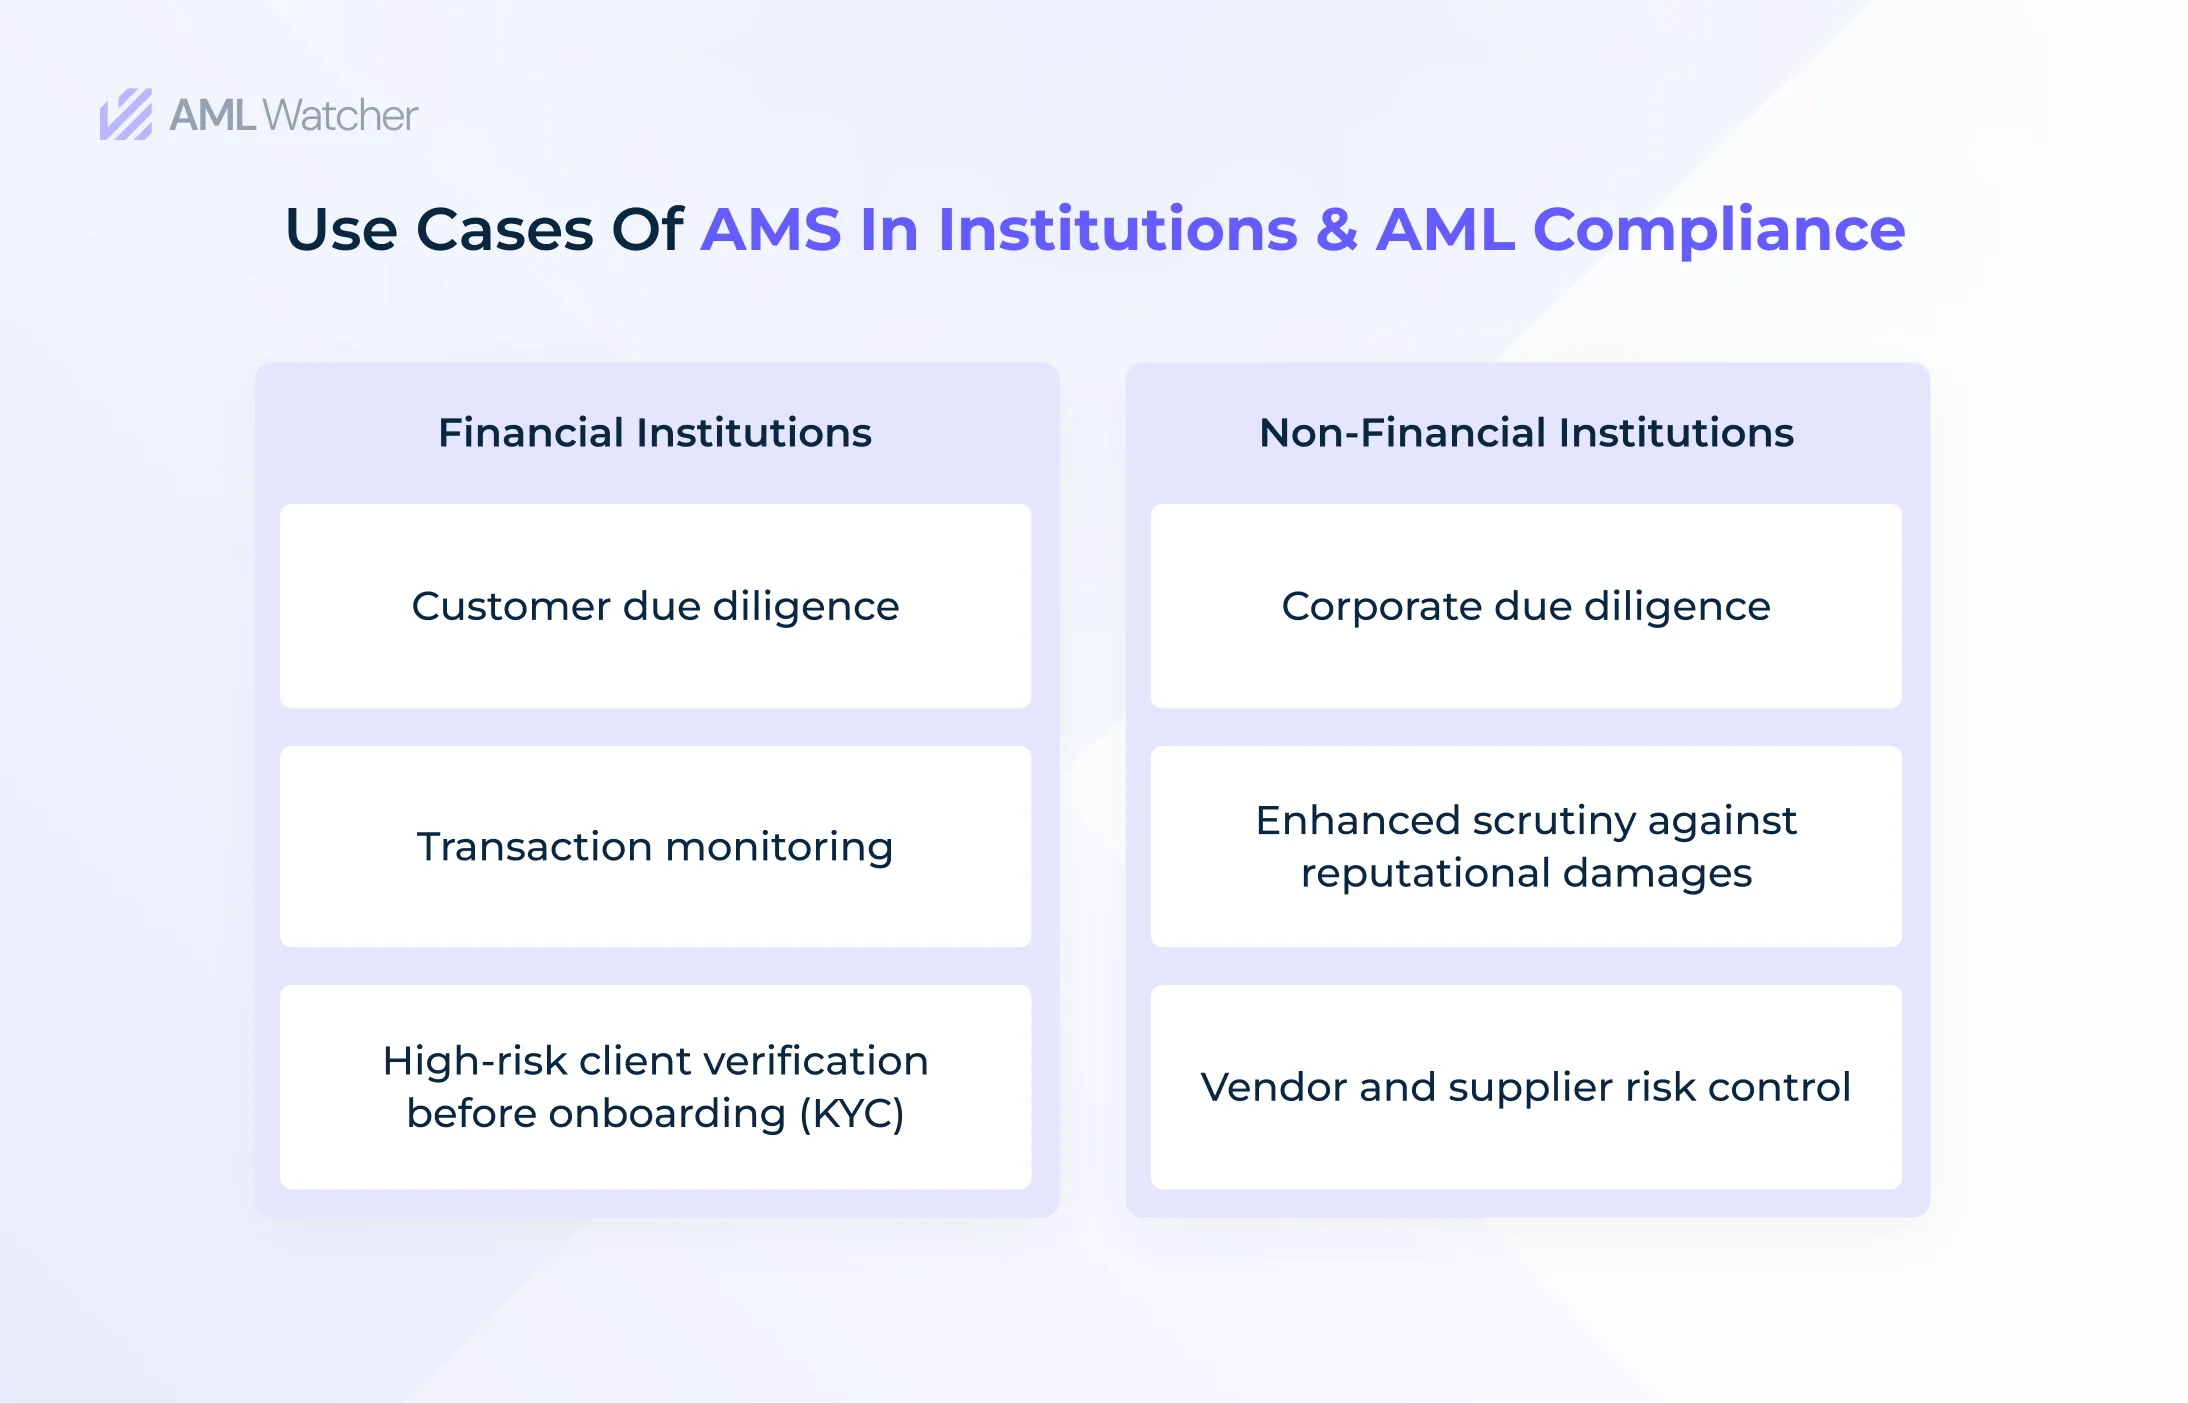 Use cases of AMS implementation in both financial and non-financial institutions meeting the AML compliance requirements. 